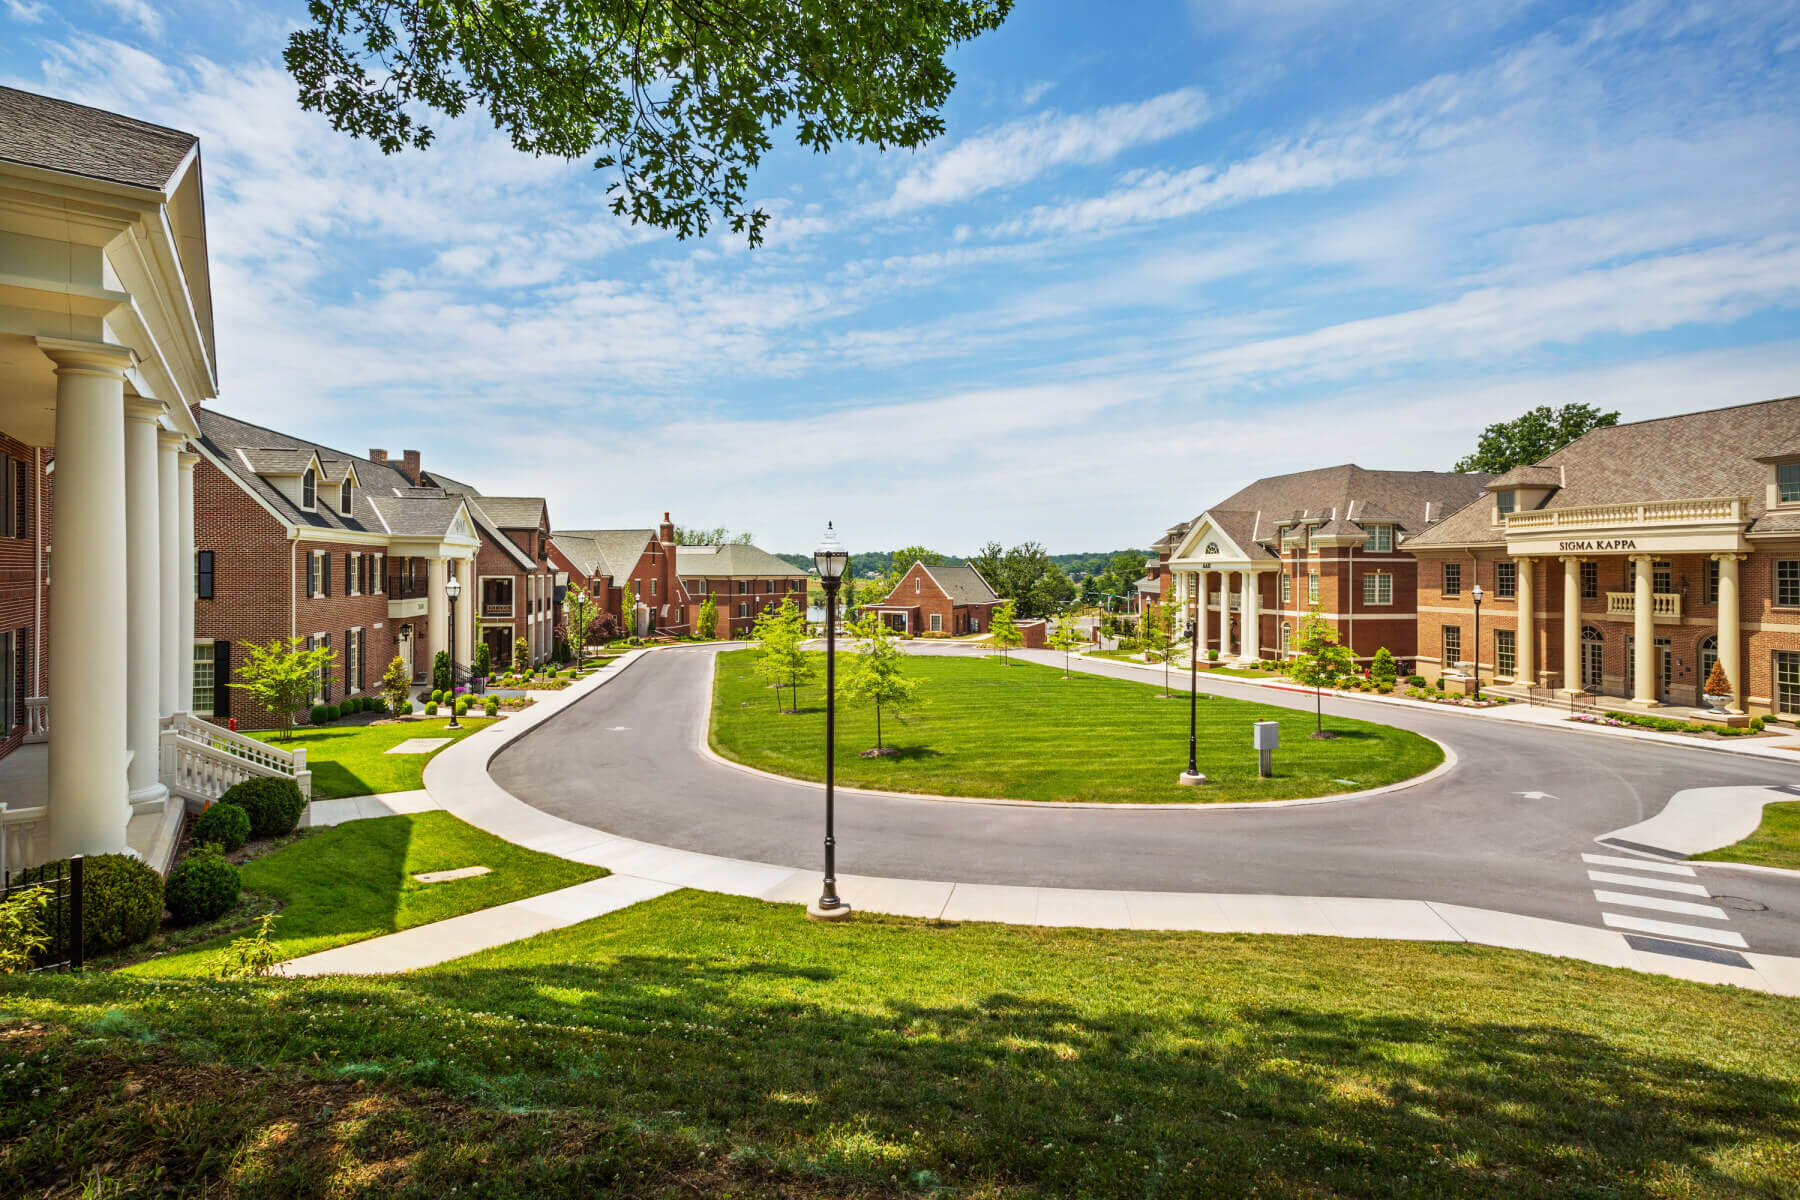 a shot showing the entire University of Tennessee’s Sorority Housing site